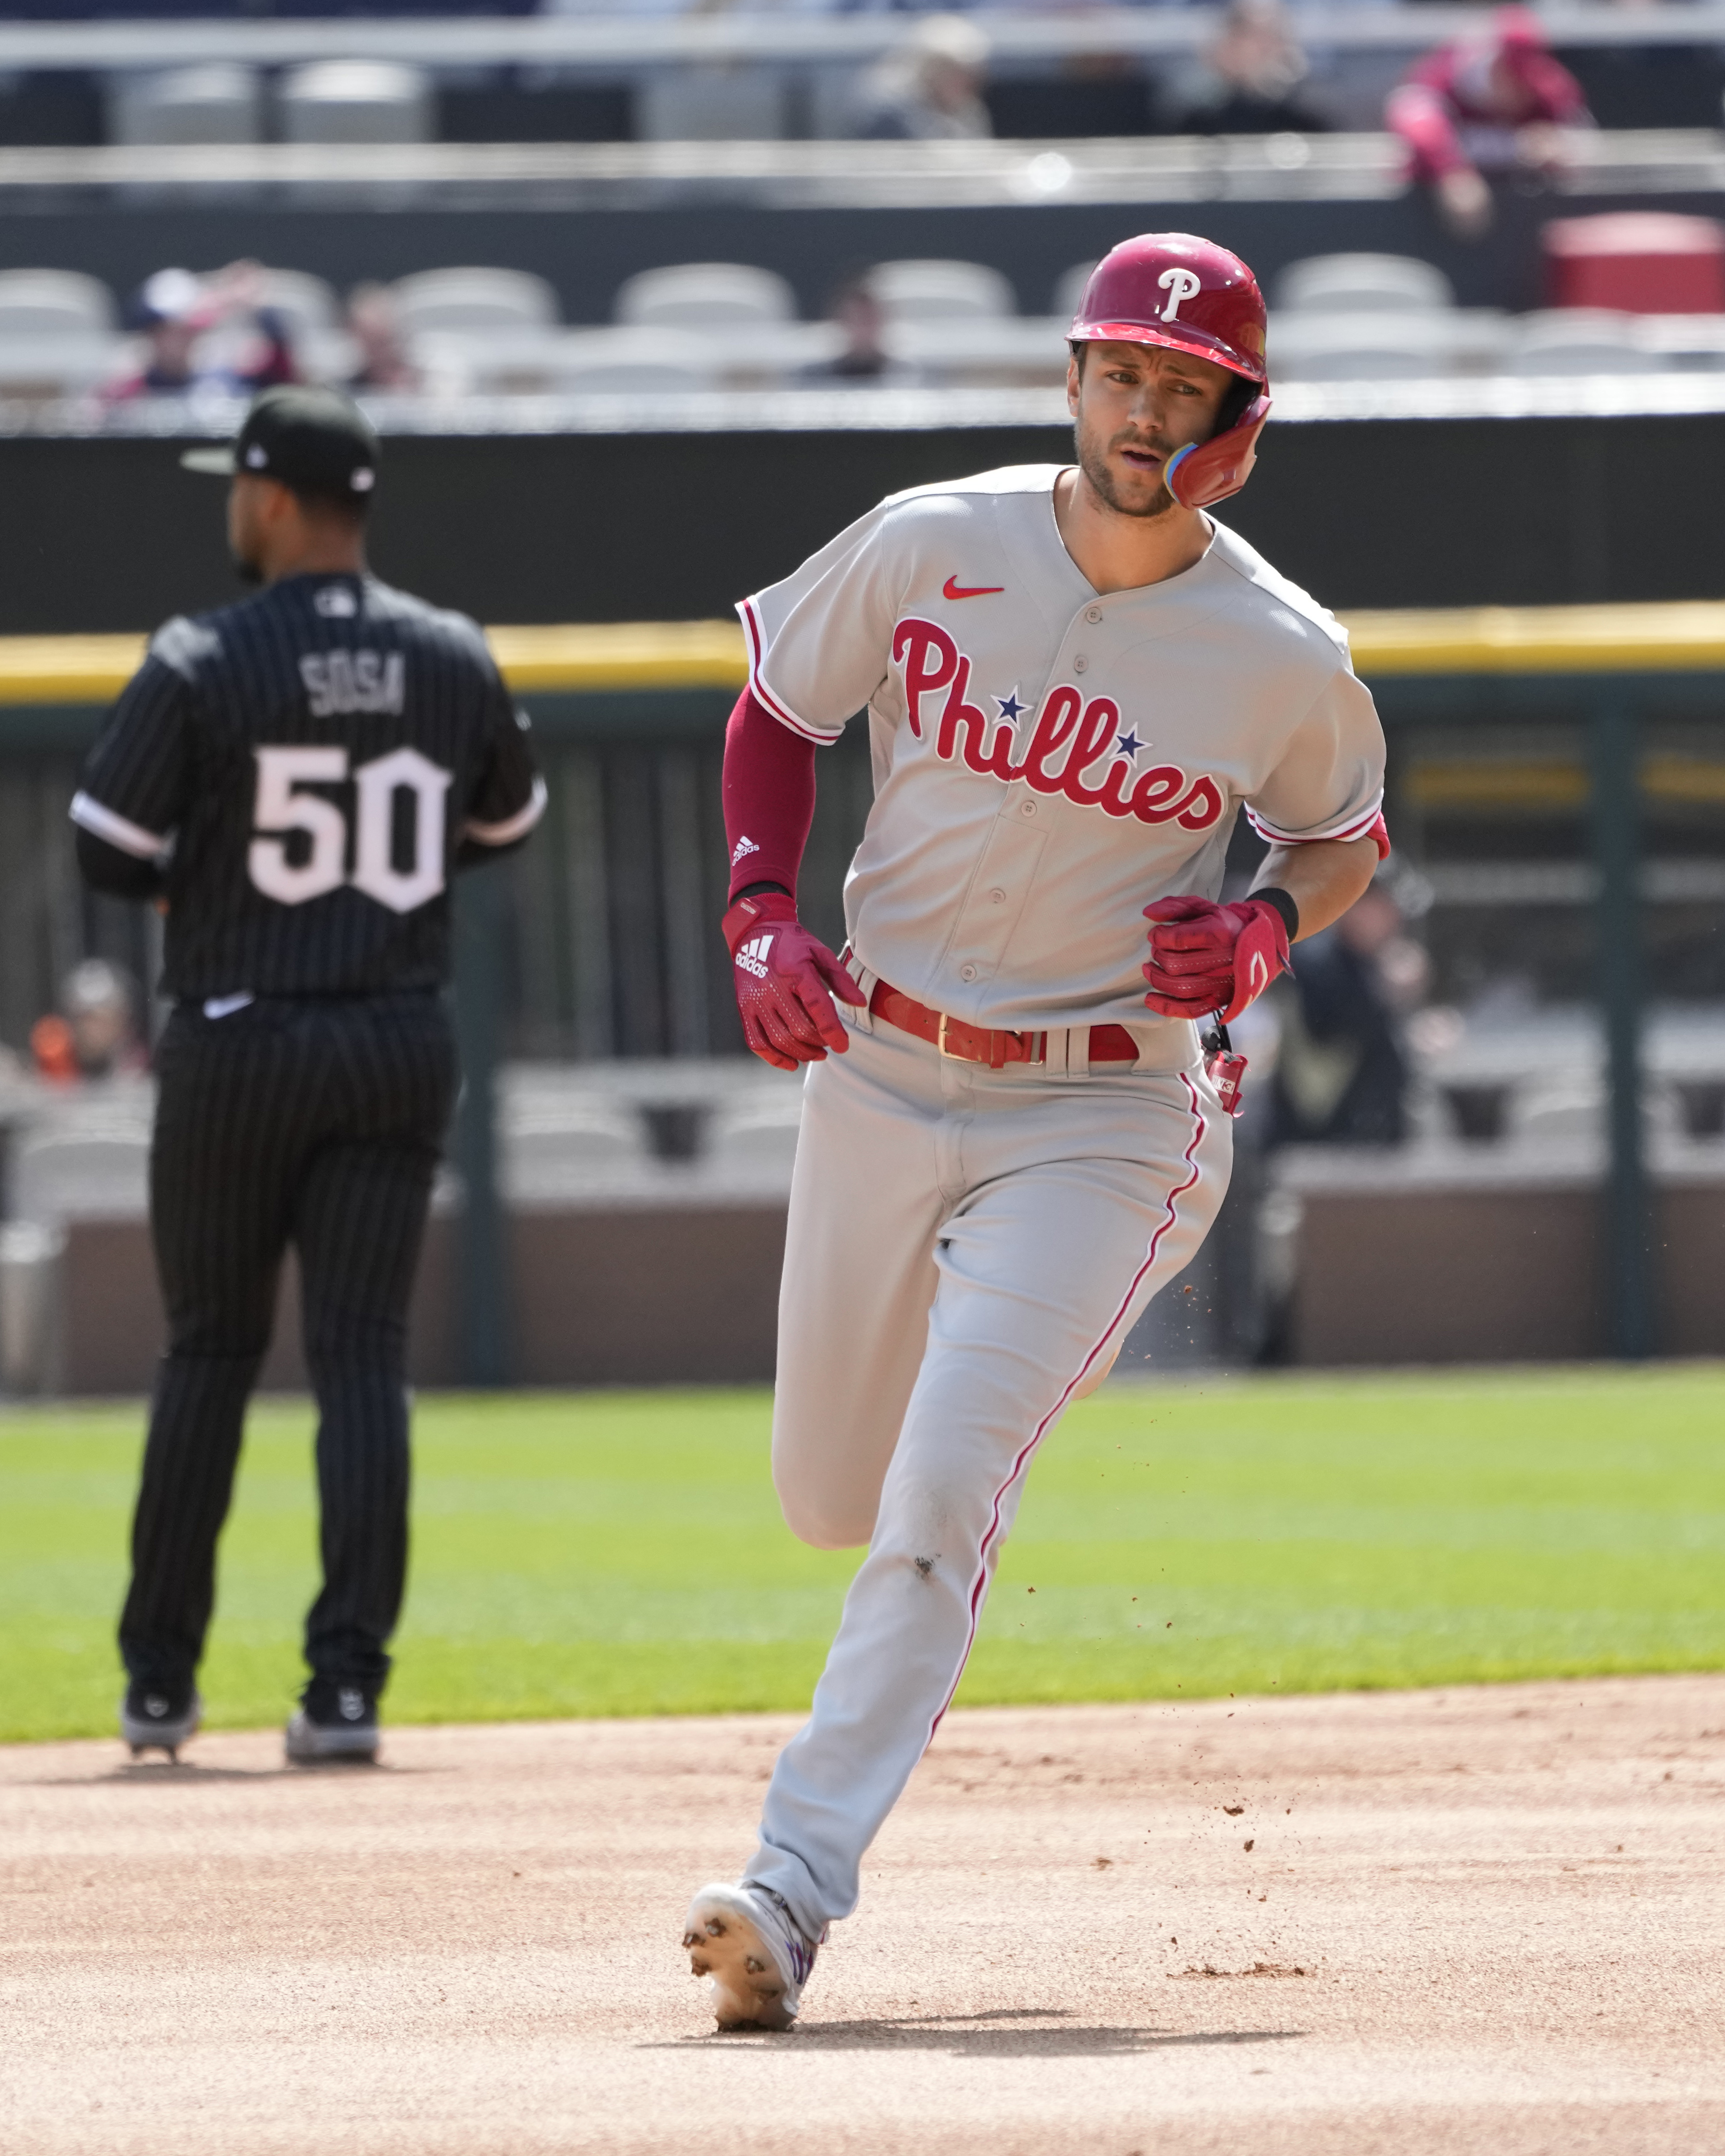 Trio of dramatic wins helps Phillies move above .500 – Macomb Daily